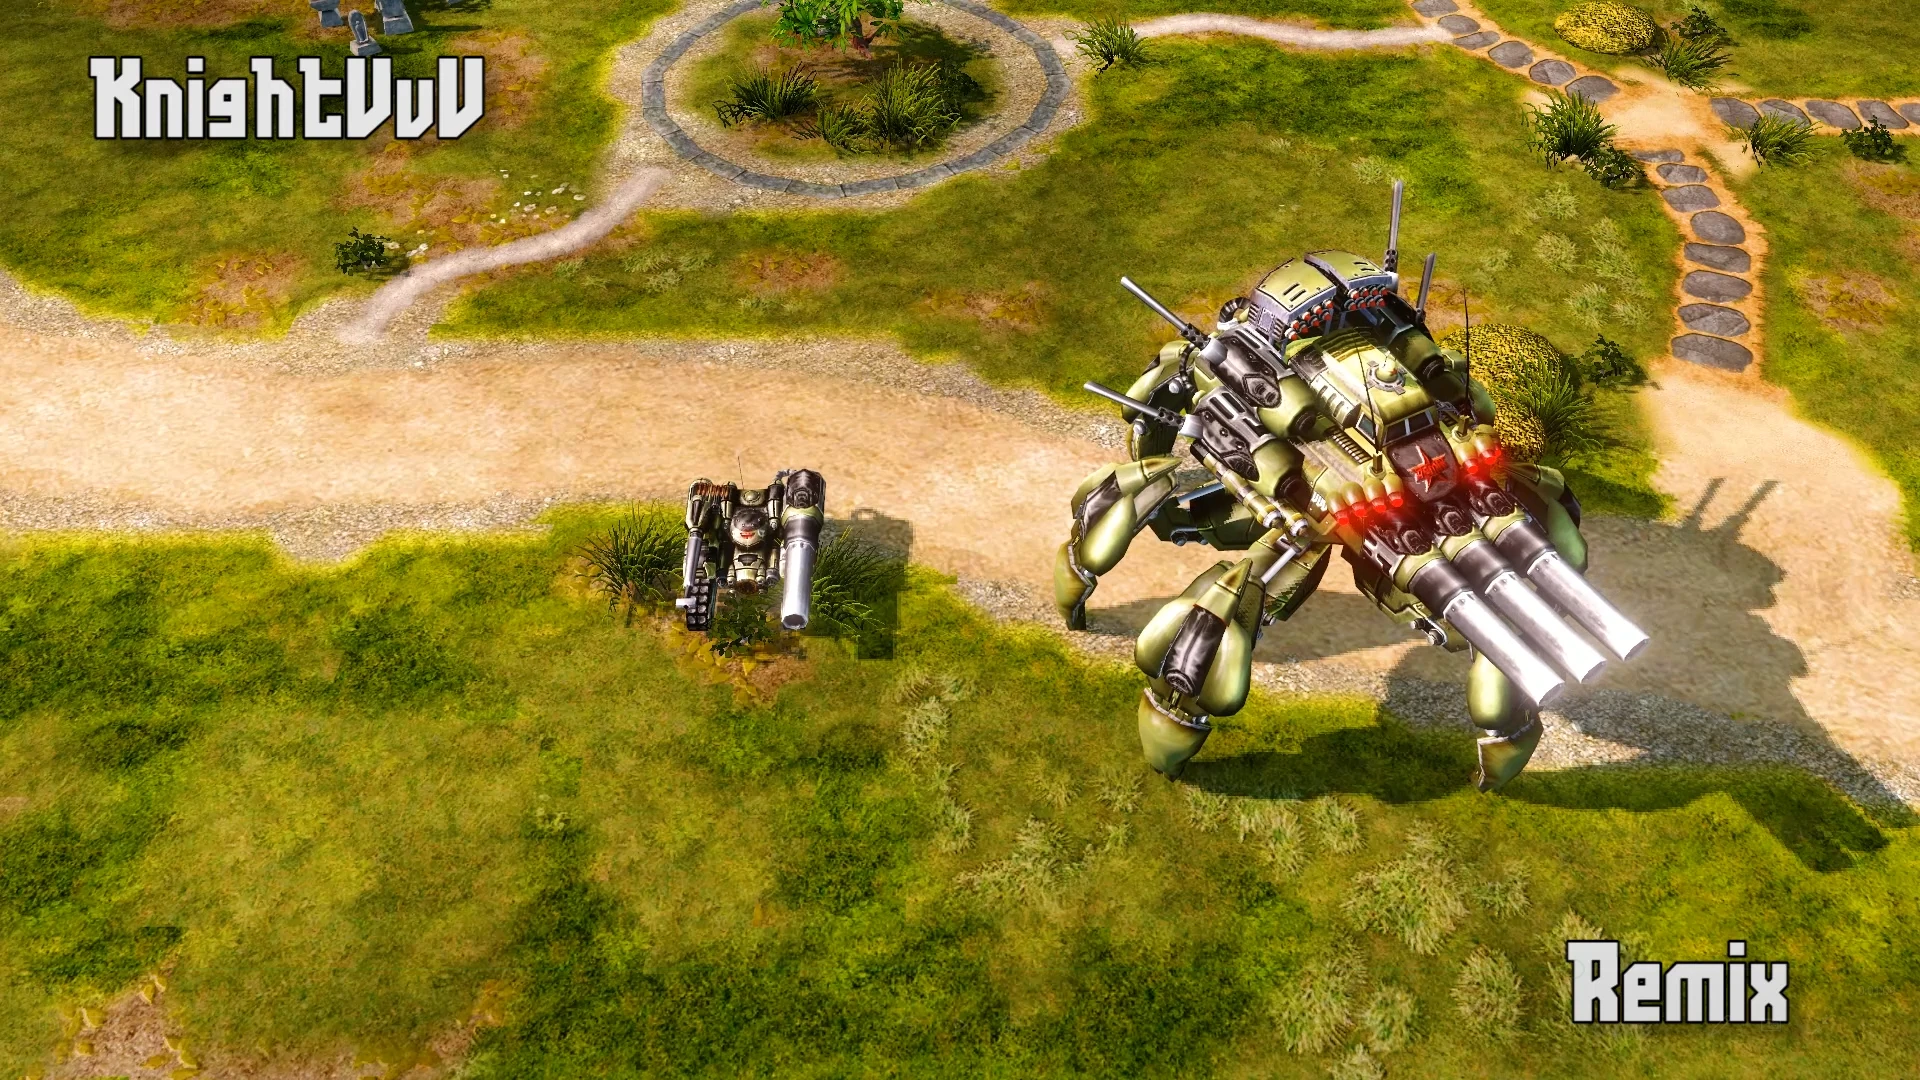 command and conquer red alert 3 mods